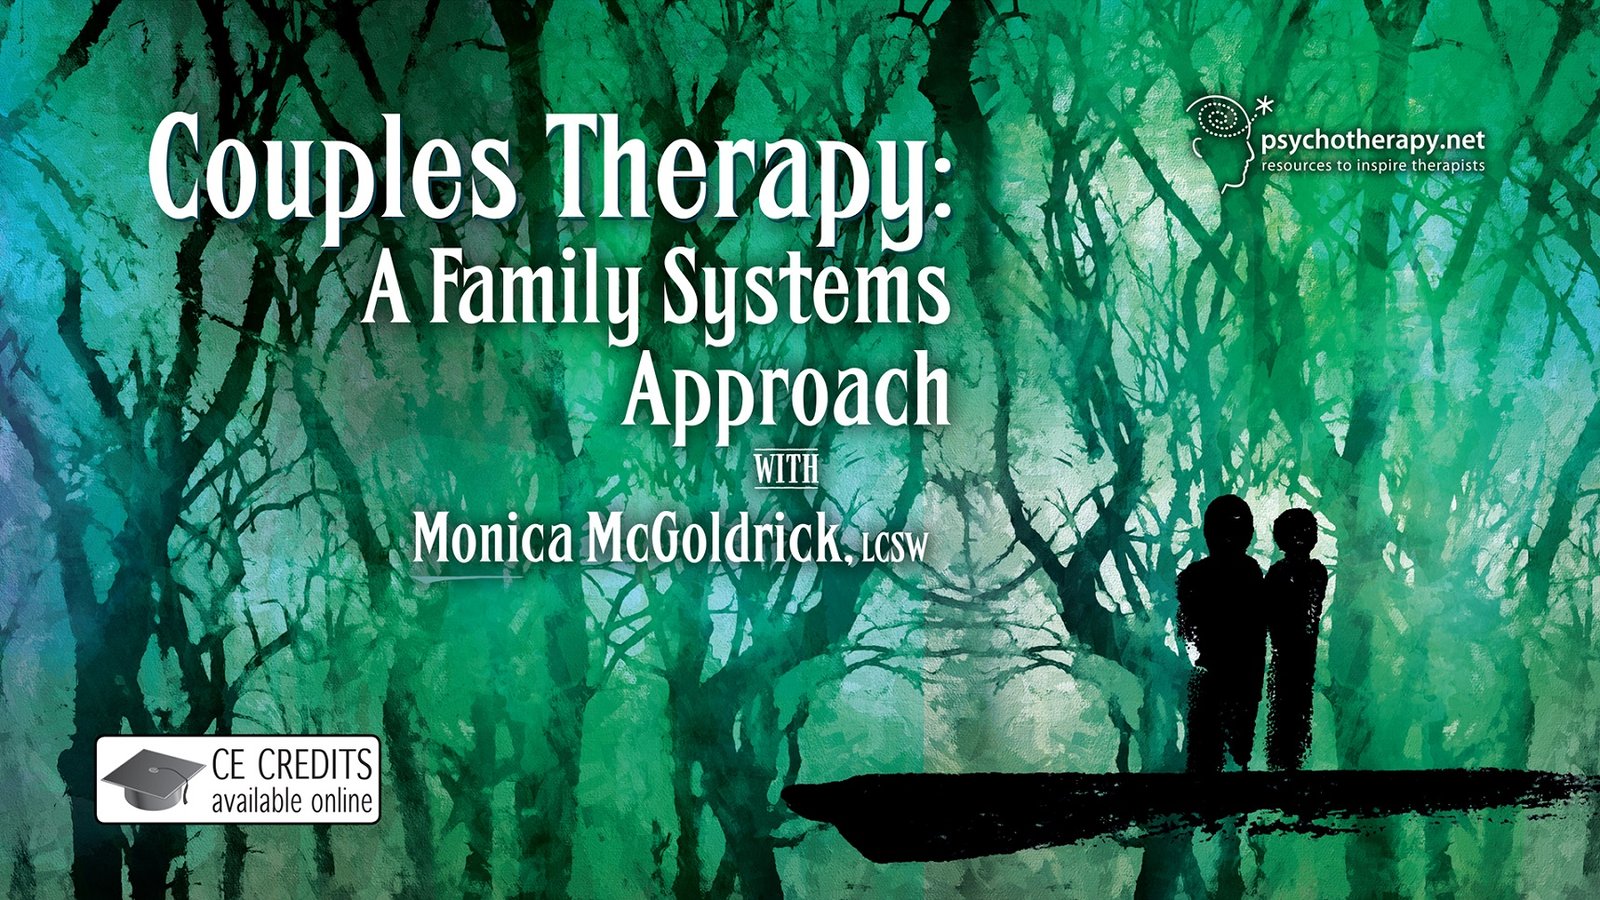 Couples Therapy: A Family Systems Approach